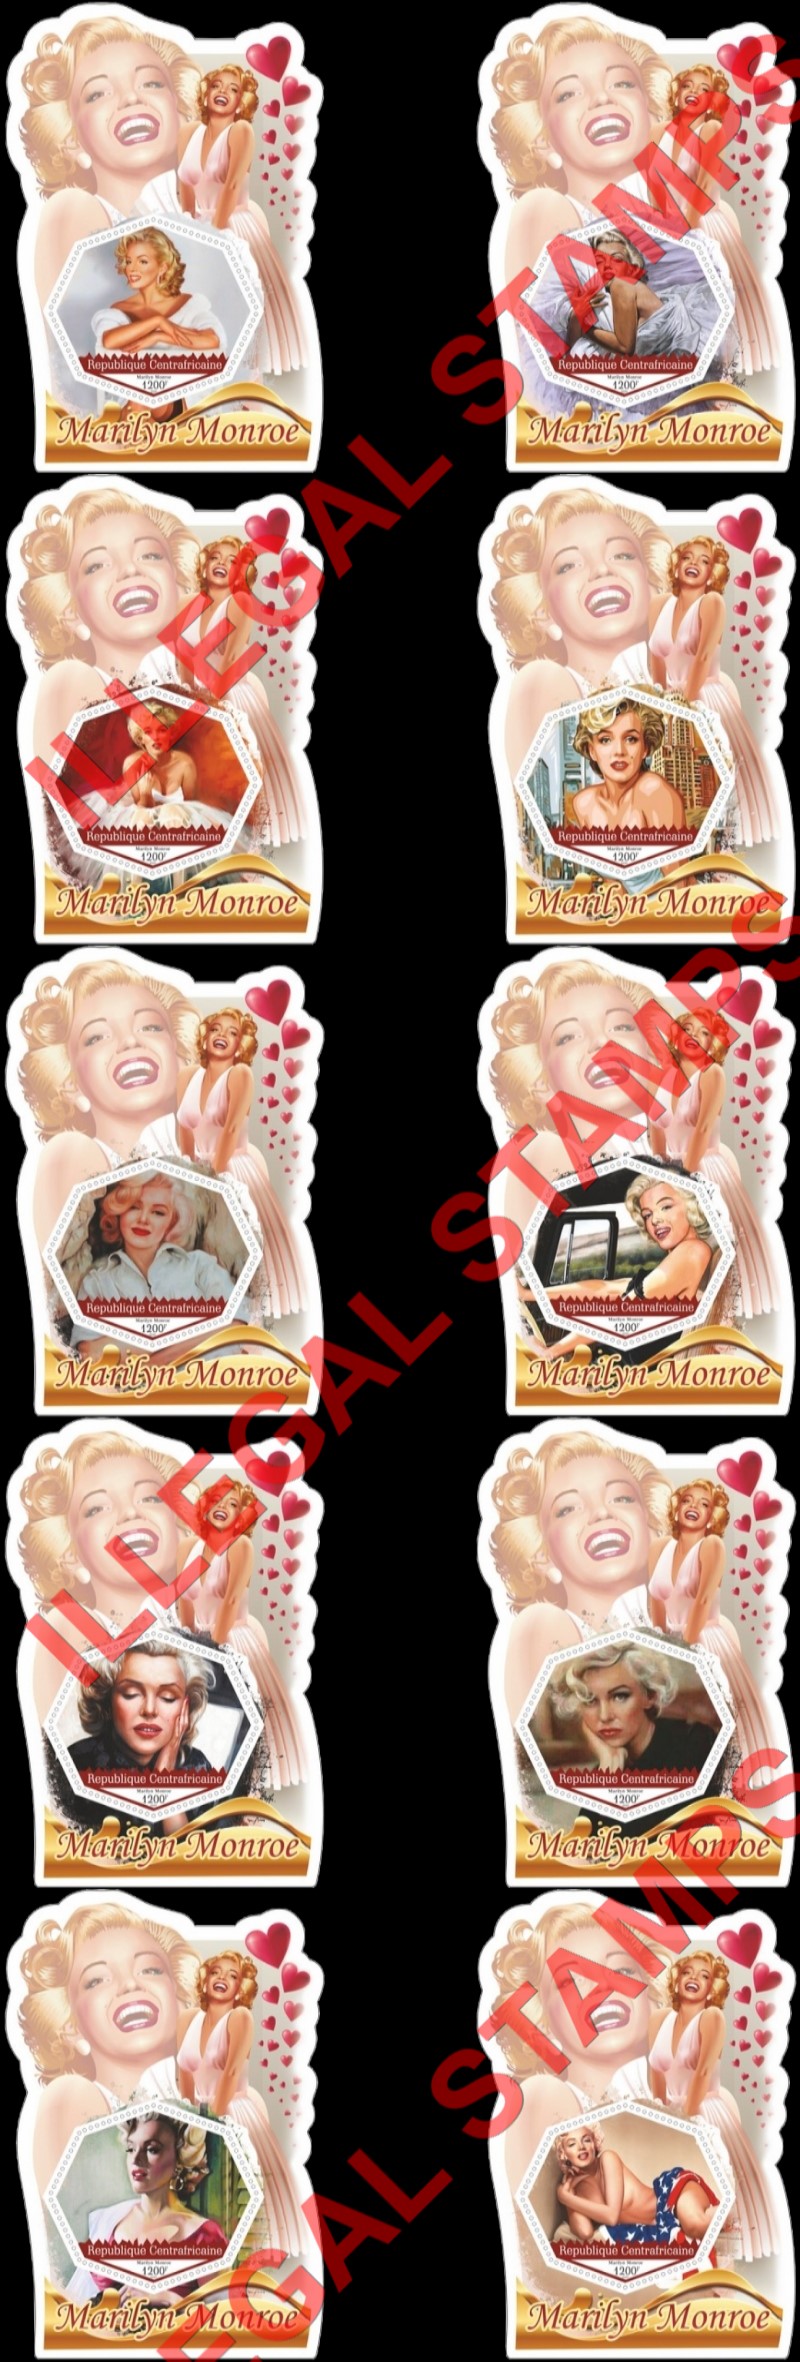 Central African Republic 2020 Marilyn Monroe Illegal Stamp Souvenir Sheets of 1